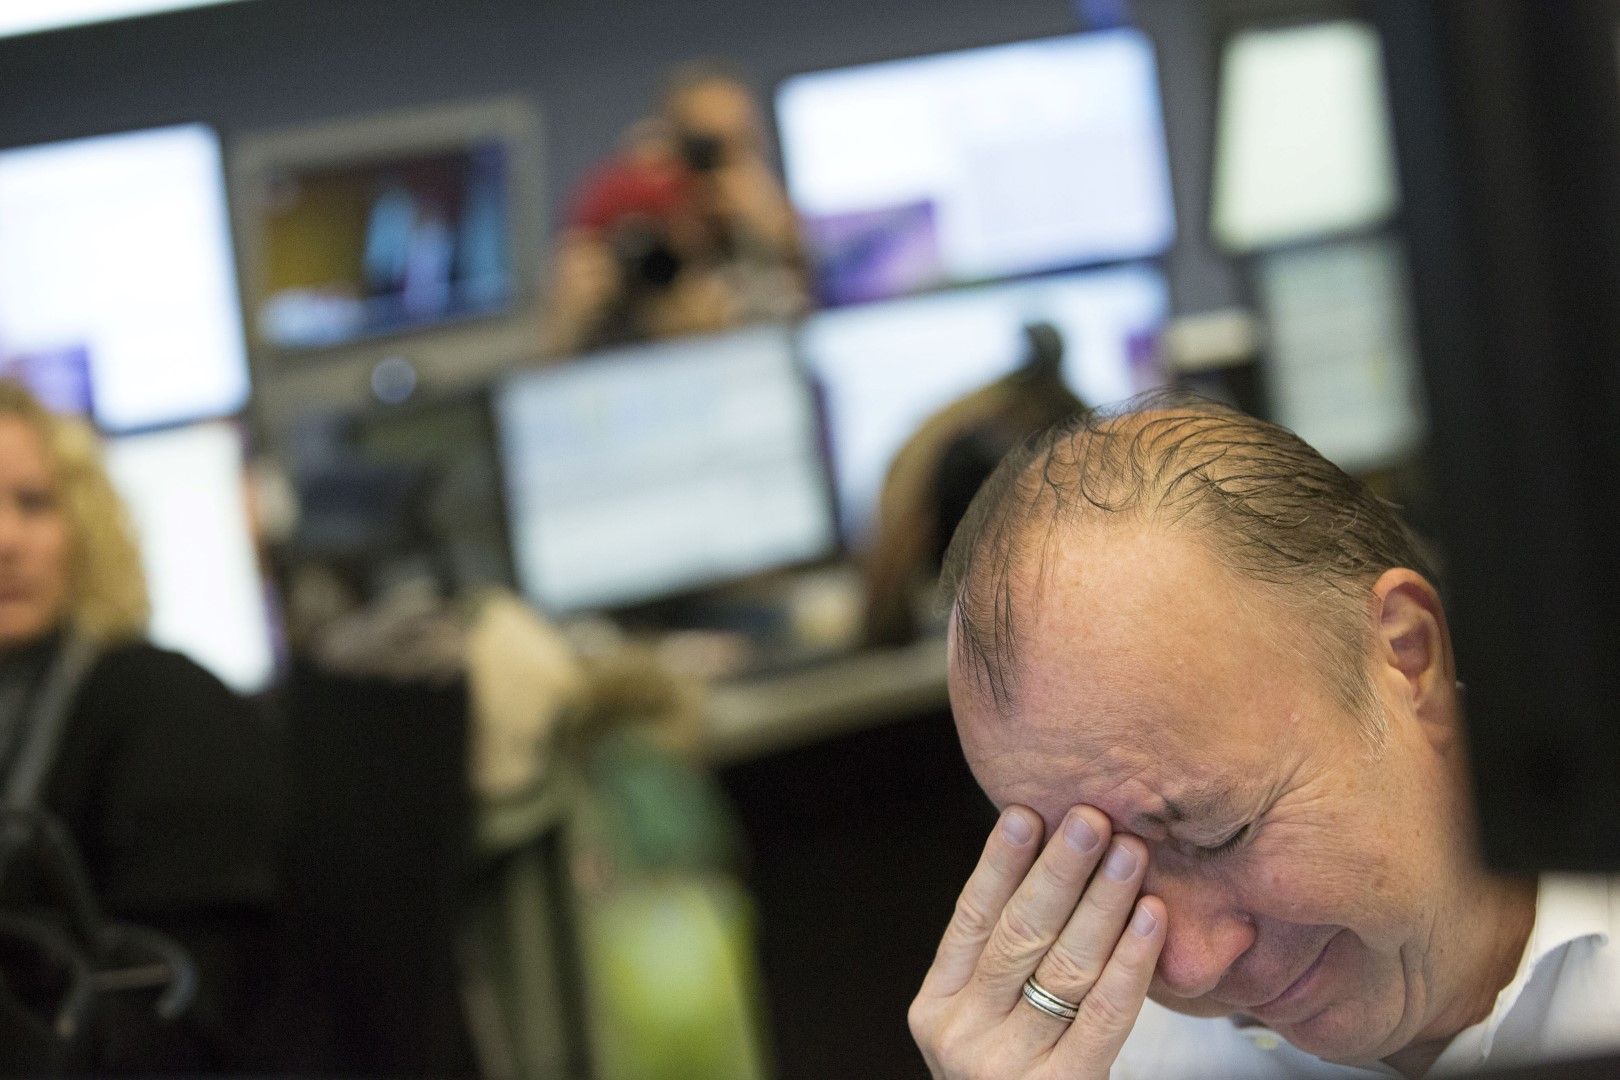 A trader reacts as trading begins inside the Frankfurt Stock Exchange following the U.S. Presidential election result announcement in Frankfurt, Germany, on Wednesday, Nov. 09, 2016. Global markets were thrown into disarray as Donald Trump won the U.S. presidential election, shocking traders after recent polls indicated that Hillary Clinton would be the victor. Photographer: Alex Kraus/Bloomberg